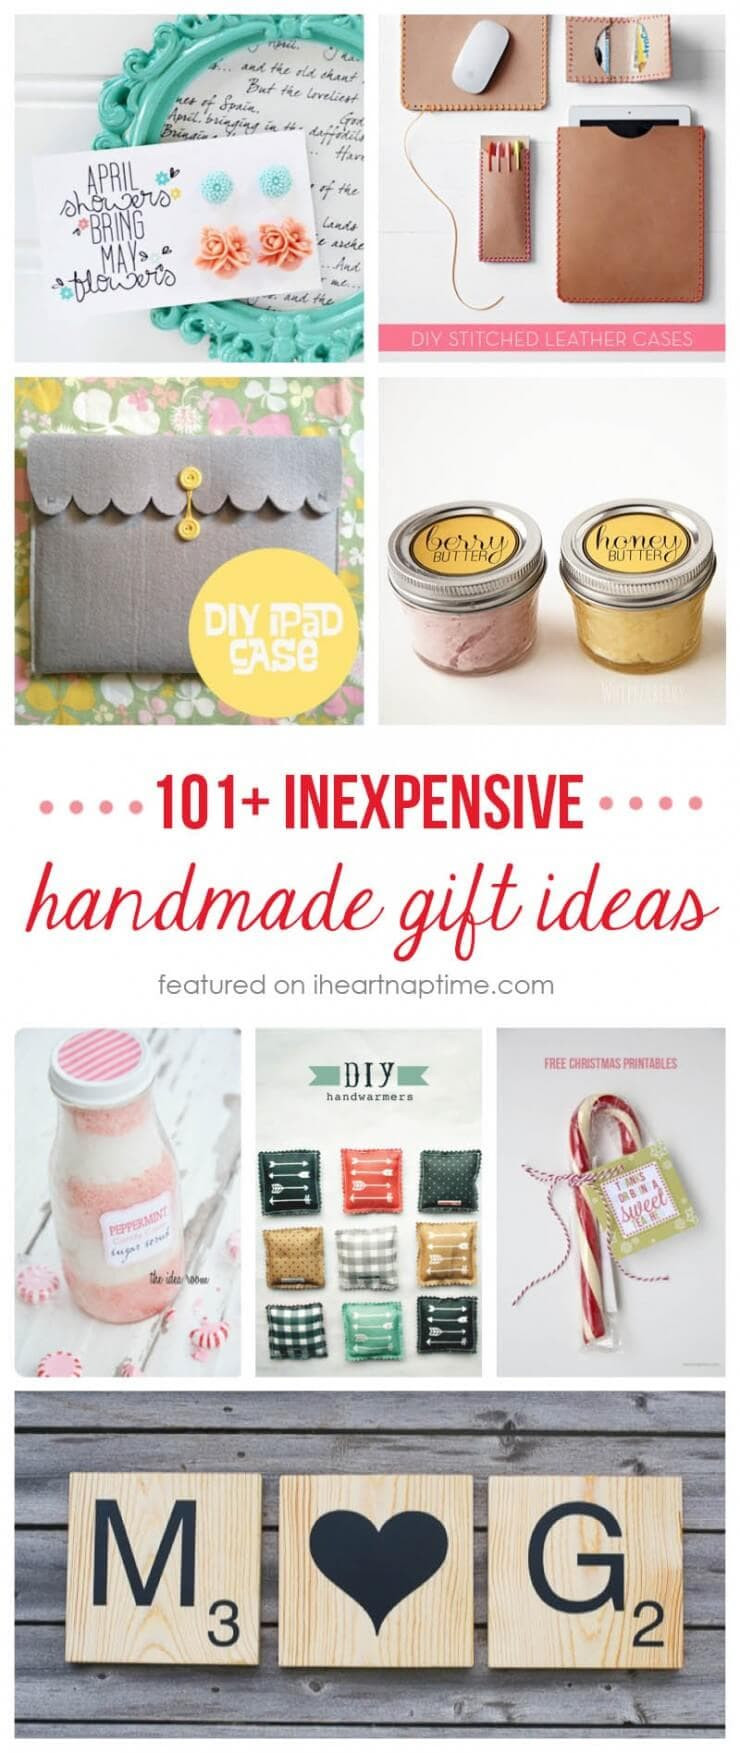 DIY Christmas Gifts
 50 homemade t ideas to make for under $5 I Heart Nap Time